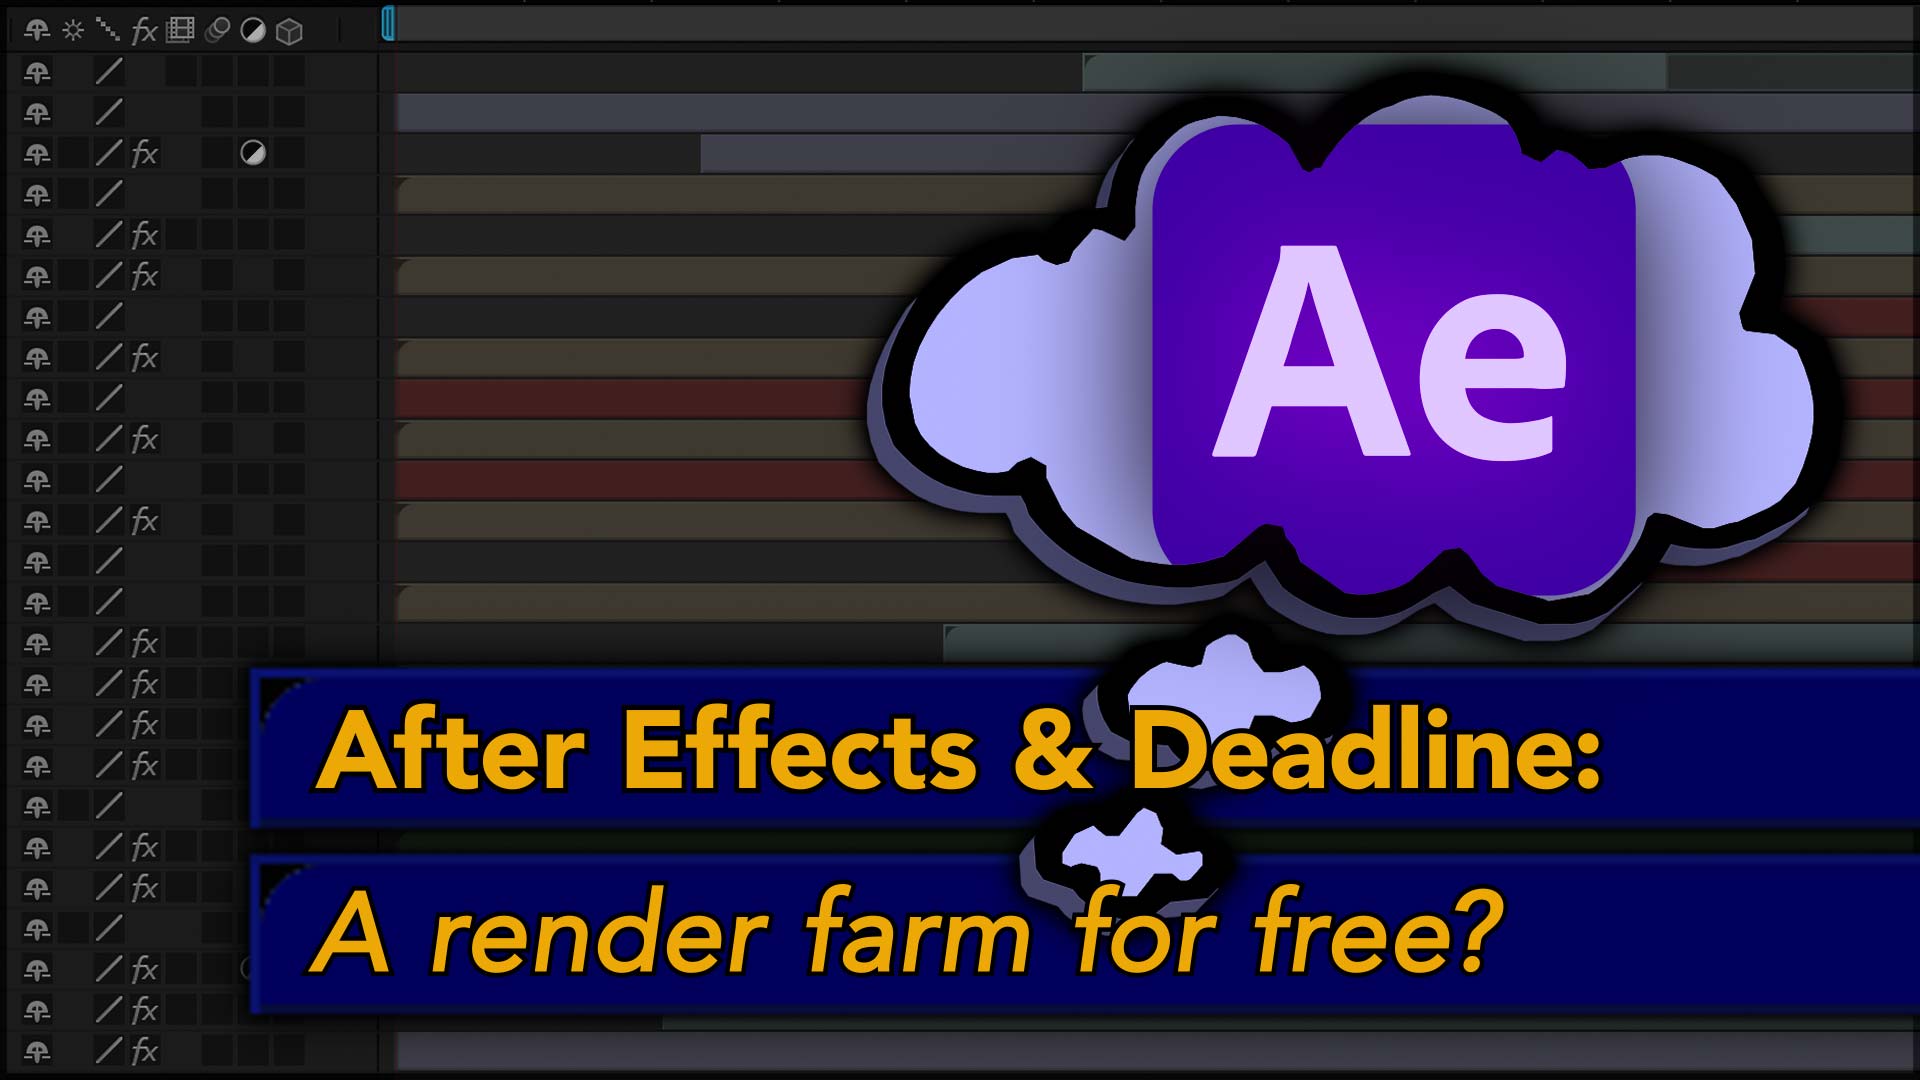 After Effects: Using Deadline for a Render Farm 4